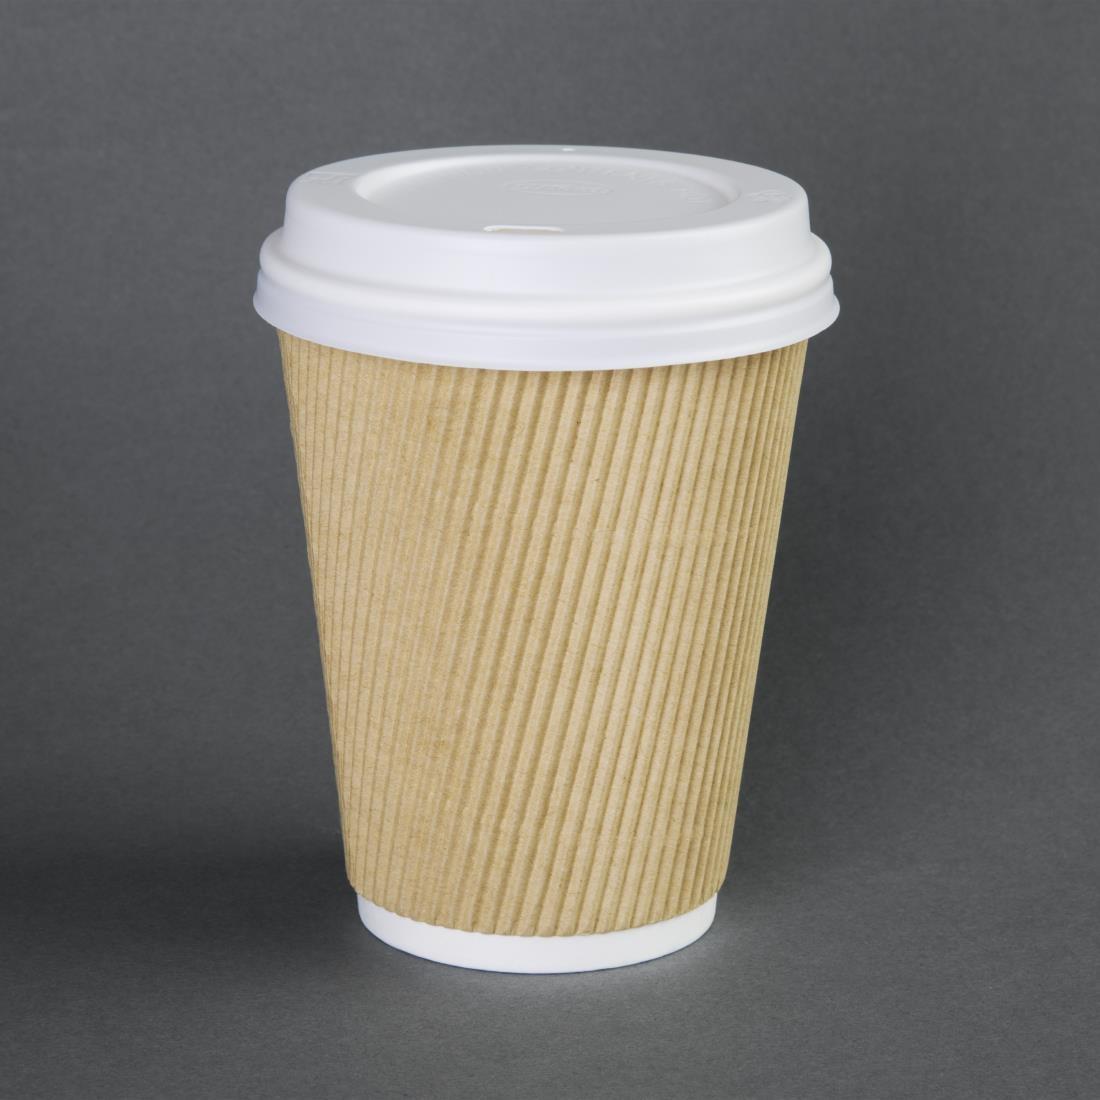 Fiesta Recyclable Coffee Cup Lids White 225ml / 8oz (Pack of 50) - CE263  - 4